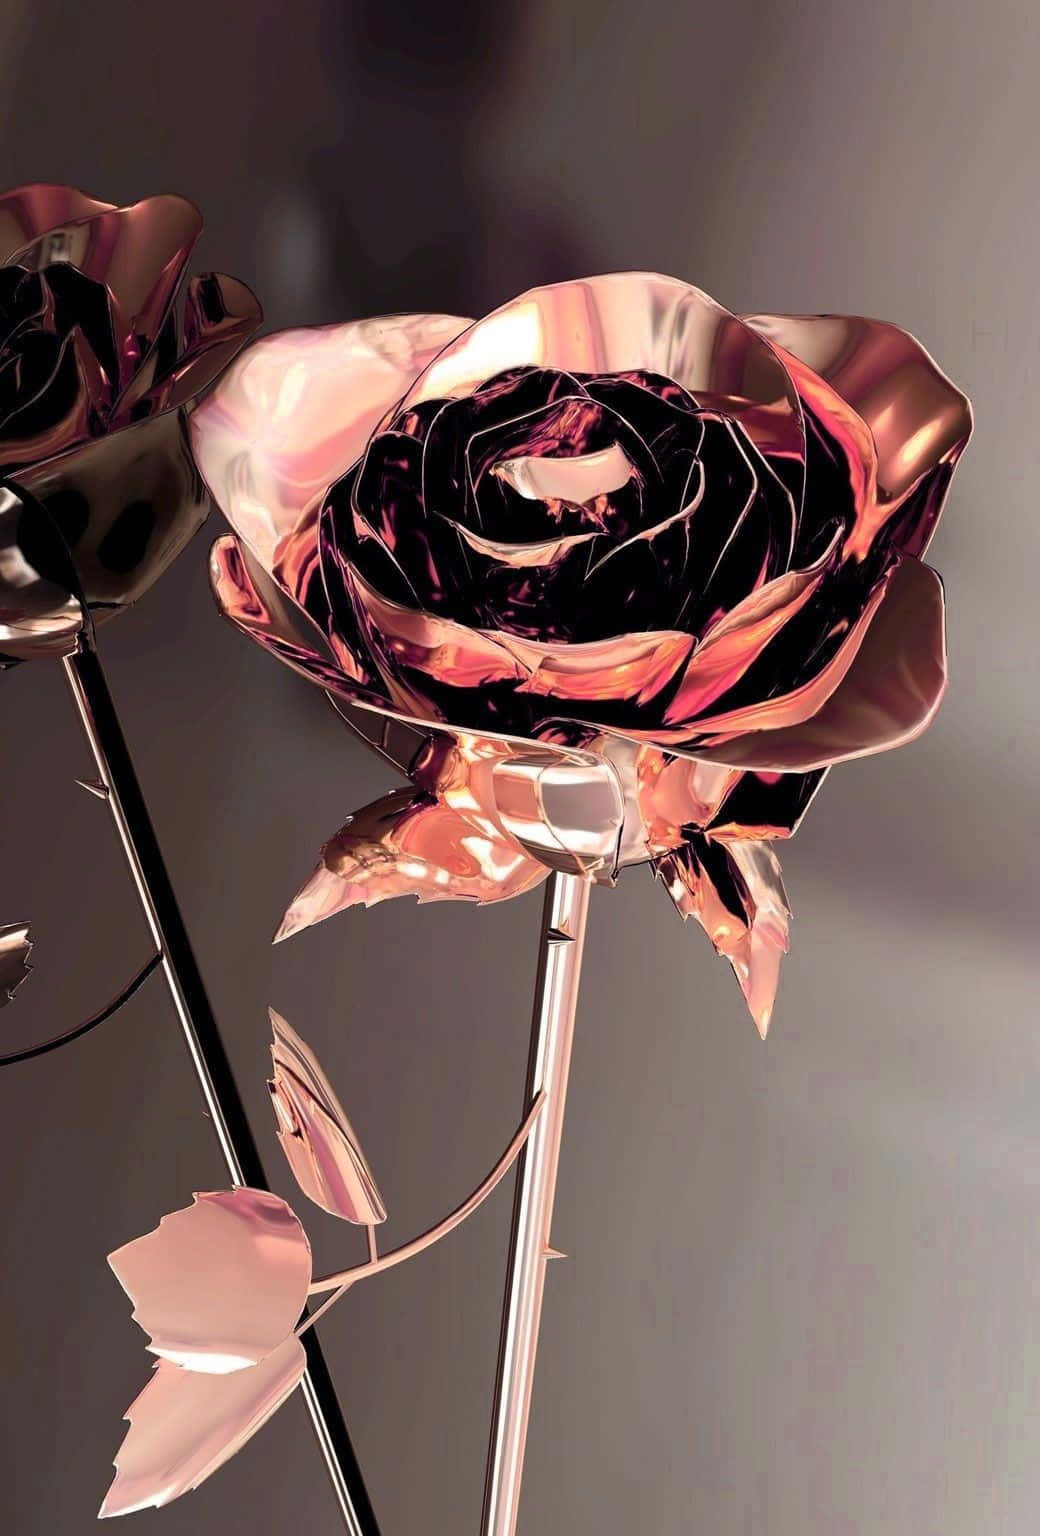 Metallic Rose Flower In Rose Gold Phone Picture